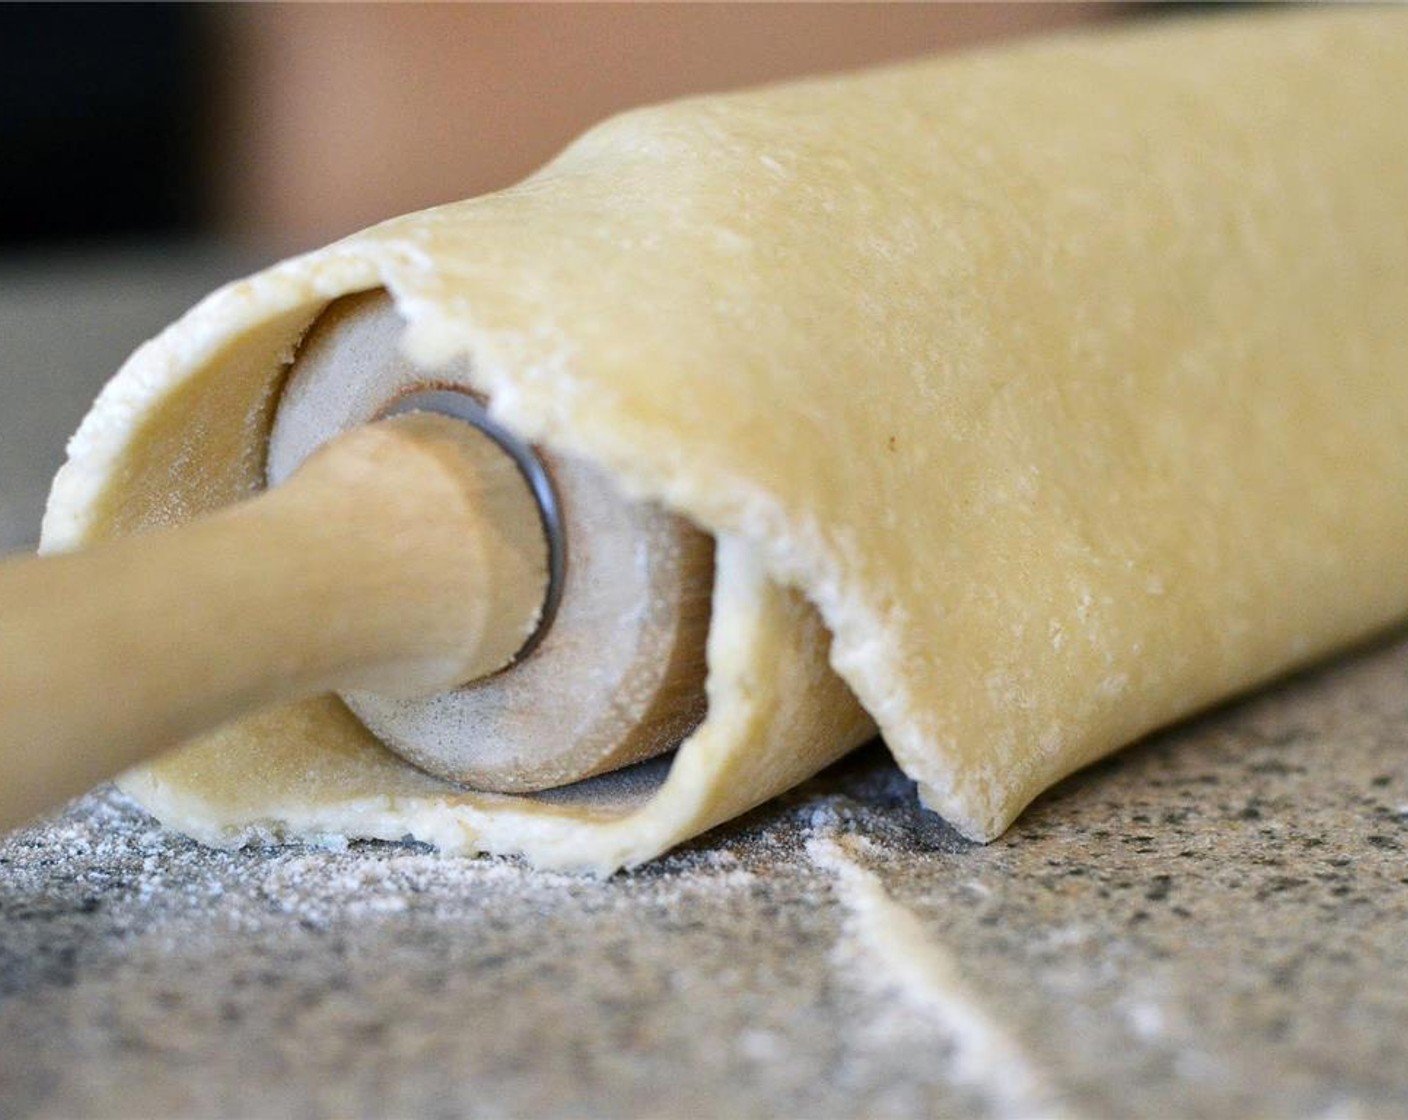 step 5 Preheat oven to 375 degrees F (190 degrees C). On a lightly floured surface, roll dough out into a 13 inch round about 1/8 inch thick. Transfer dough to parchment lined baking sheet and place in fridge until needed.